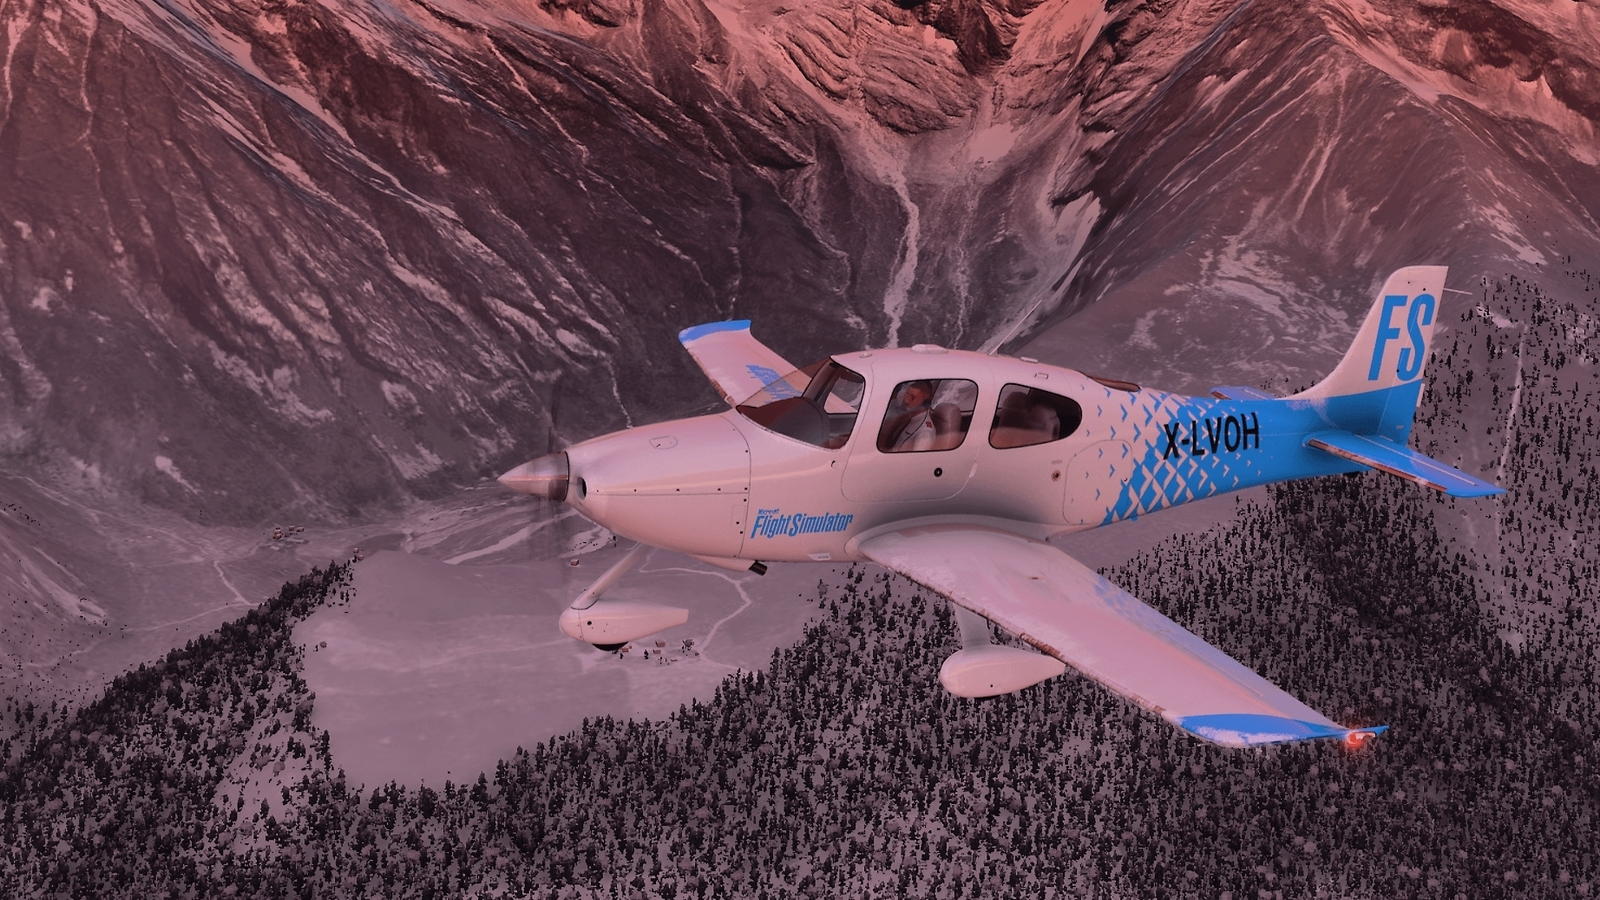 Flight Simulator doesn't have helicopters, modders added one